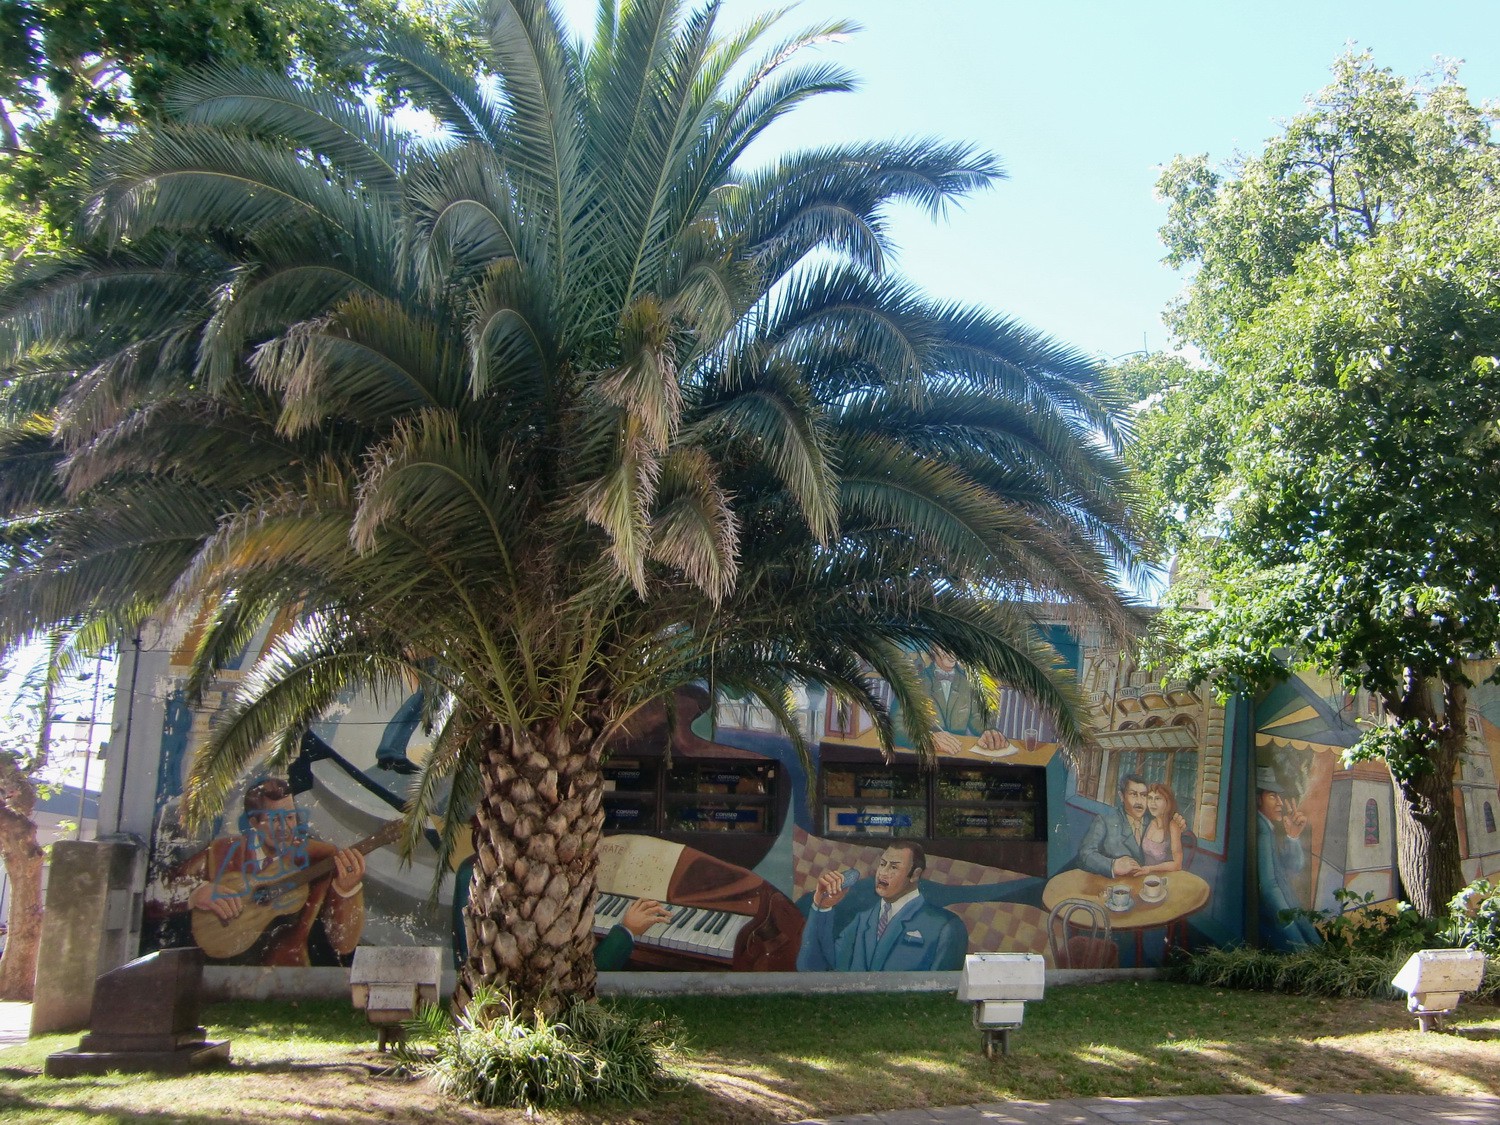 Wall painting in Zarate